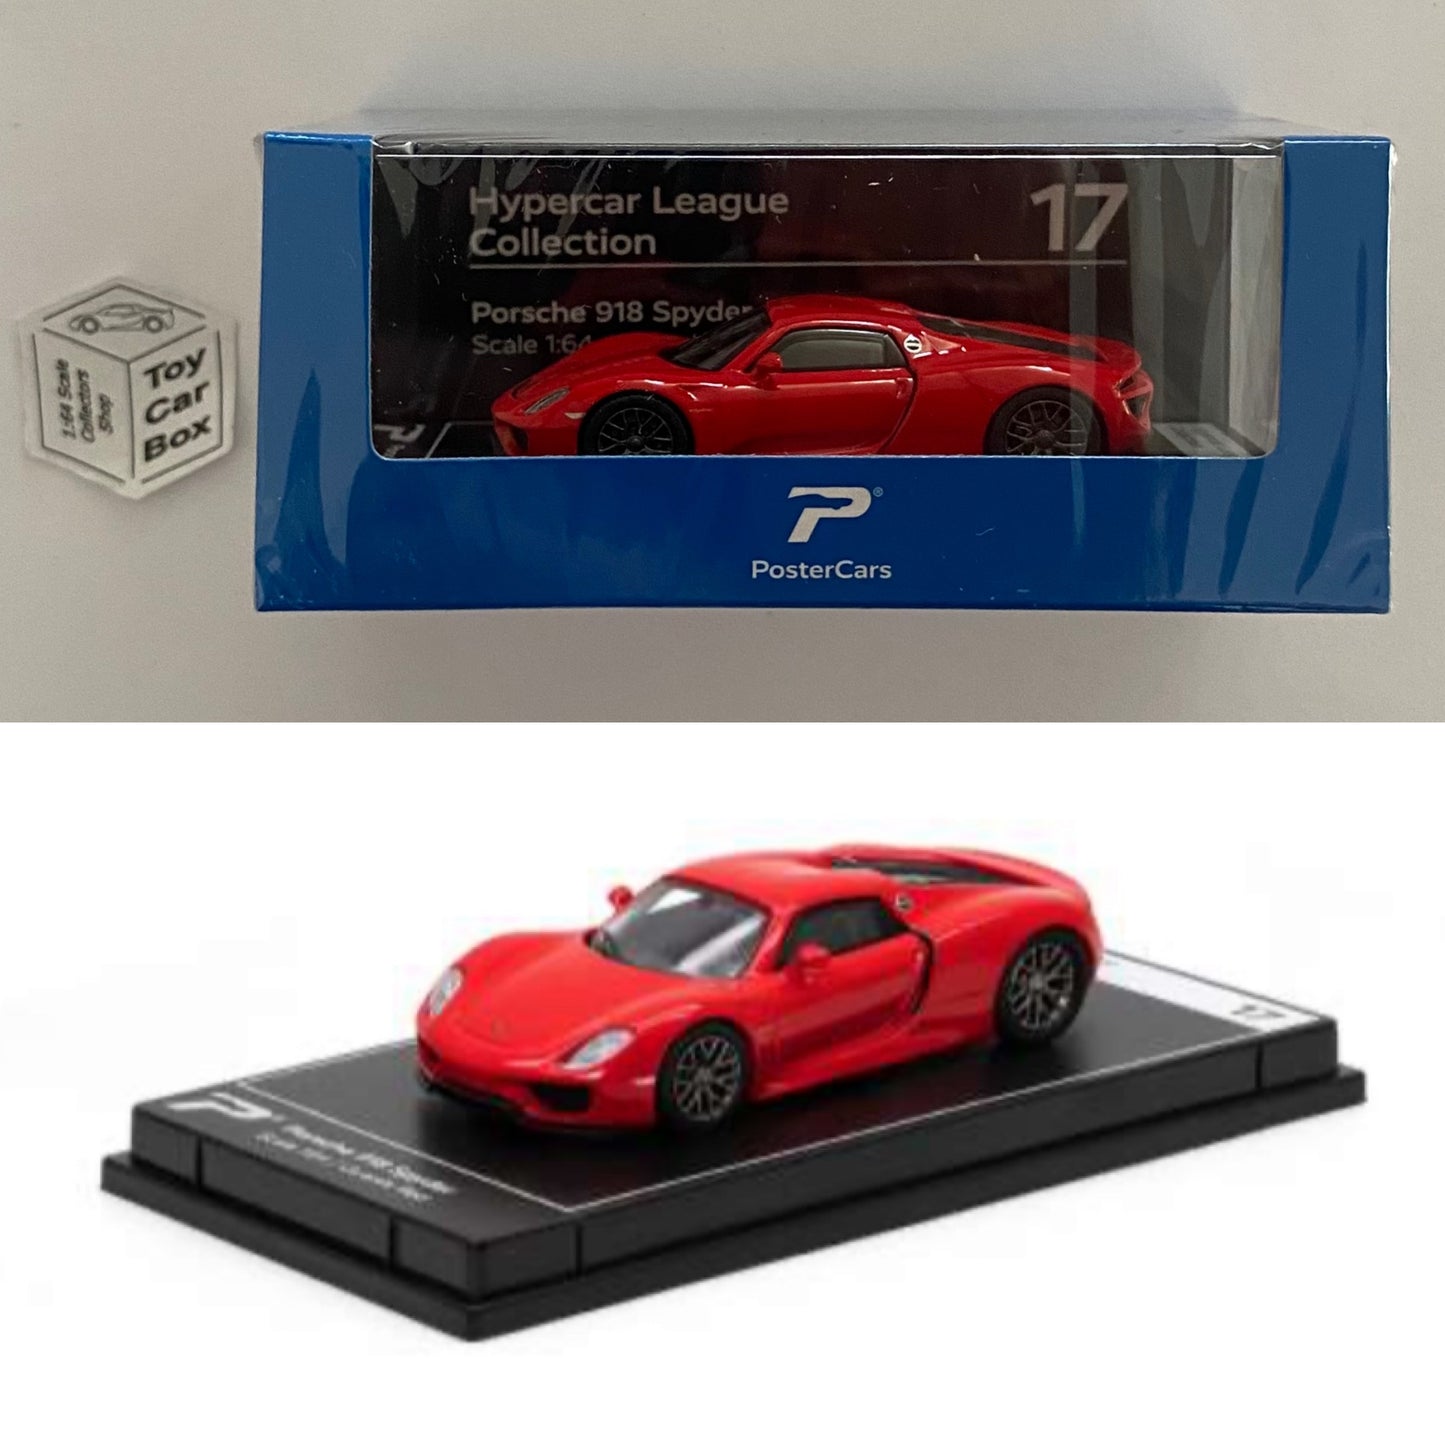 KINTOY POSTER CARS - Porsche 918 (Guards Red #17 - 1/64 Scale Hypercar) G51g